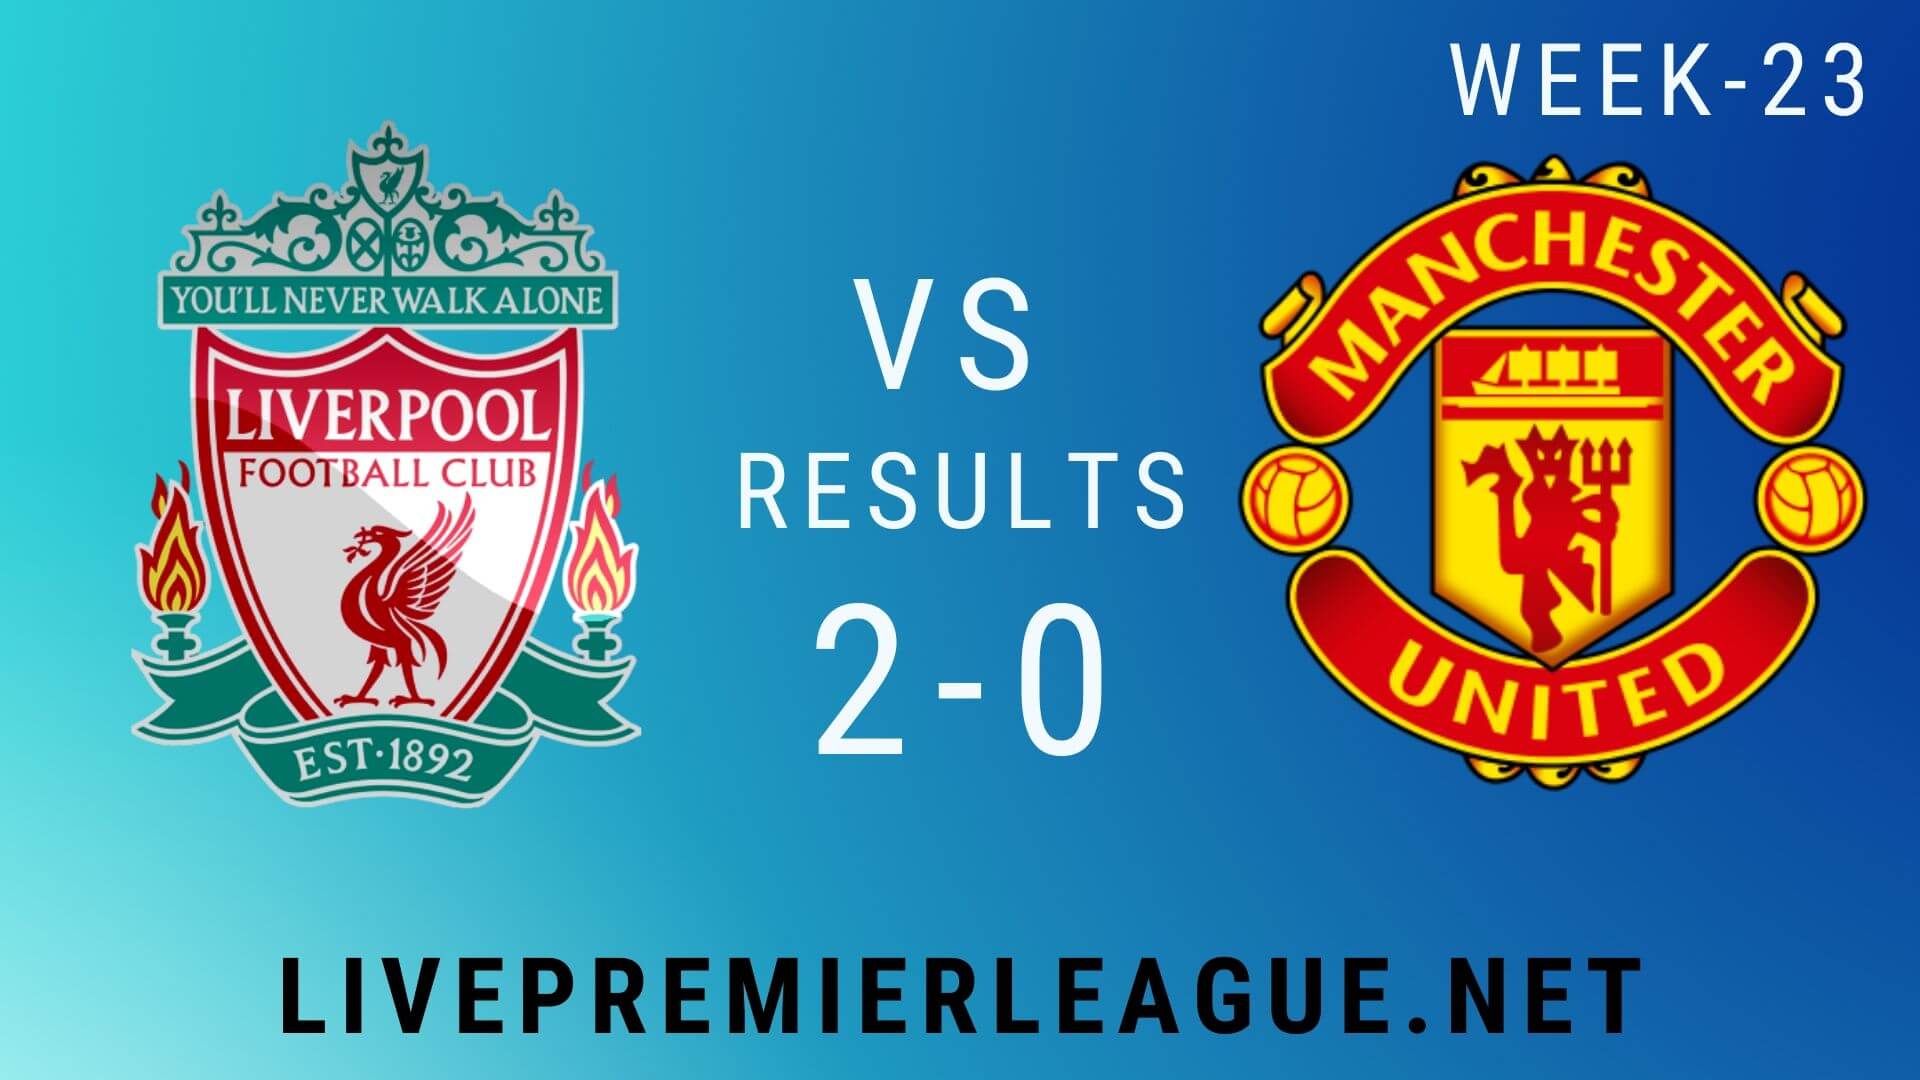 Liverpool Vs Manchester United | Week 23 Result 2020